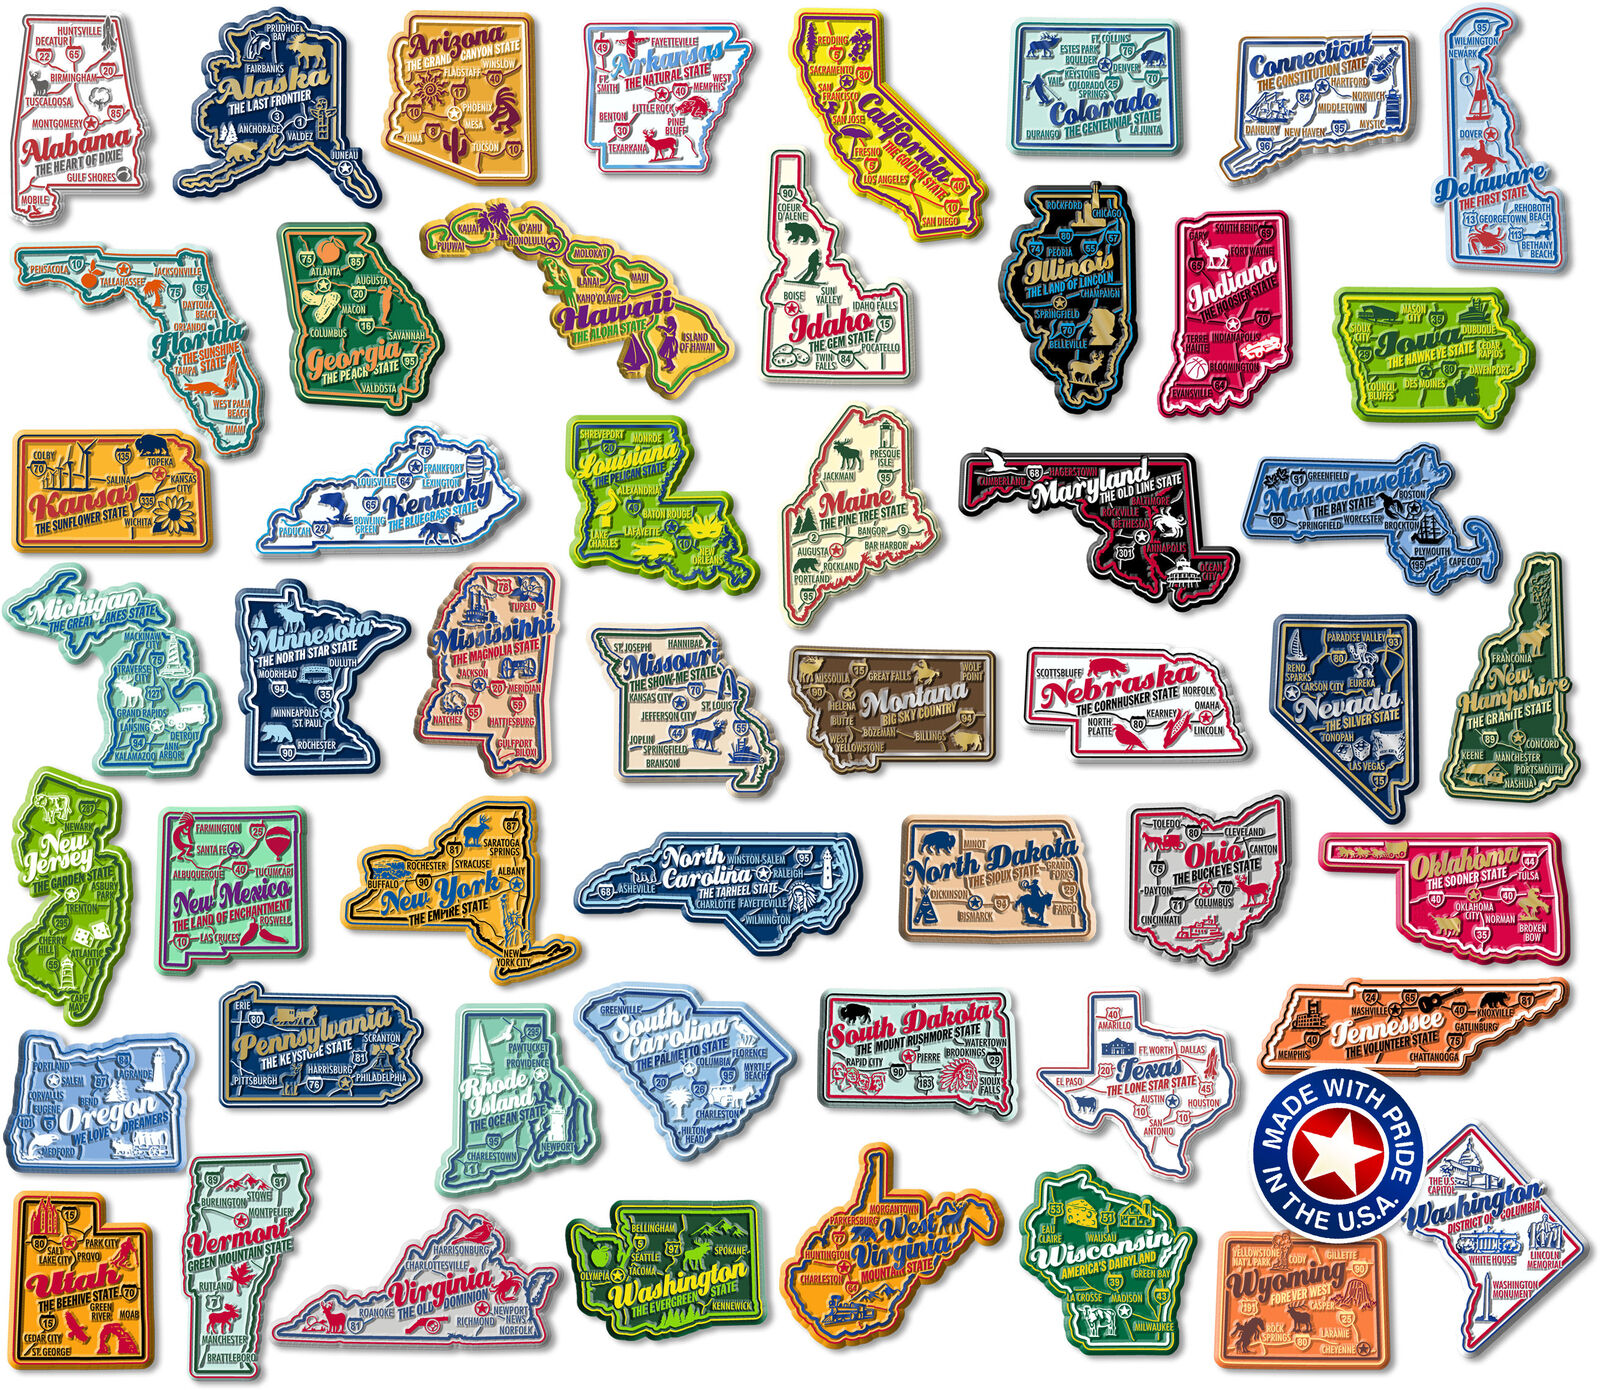 U.S. Premium State Map Magnet Set by Classic Magnets, 51-Piece Set